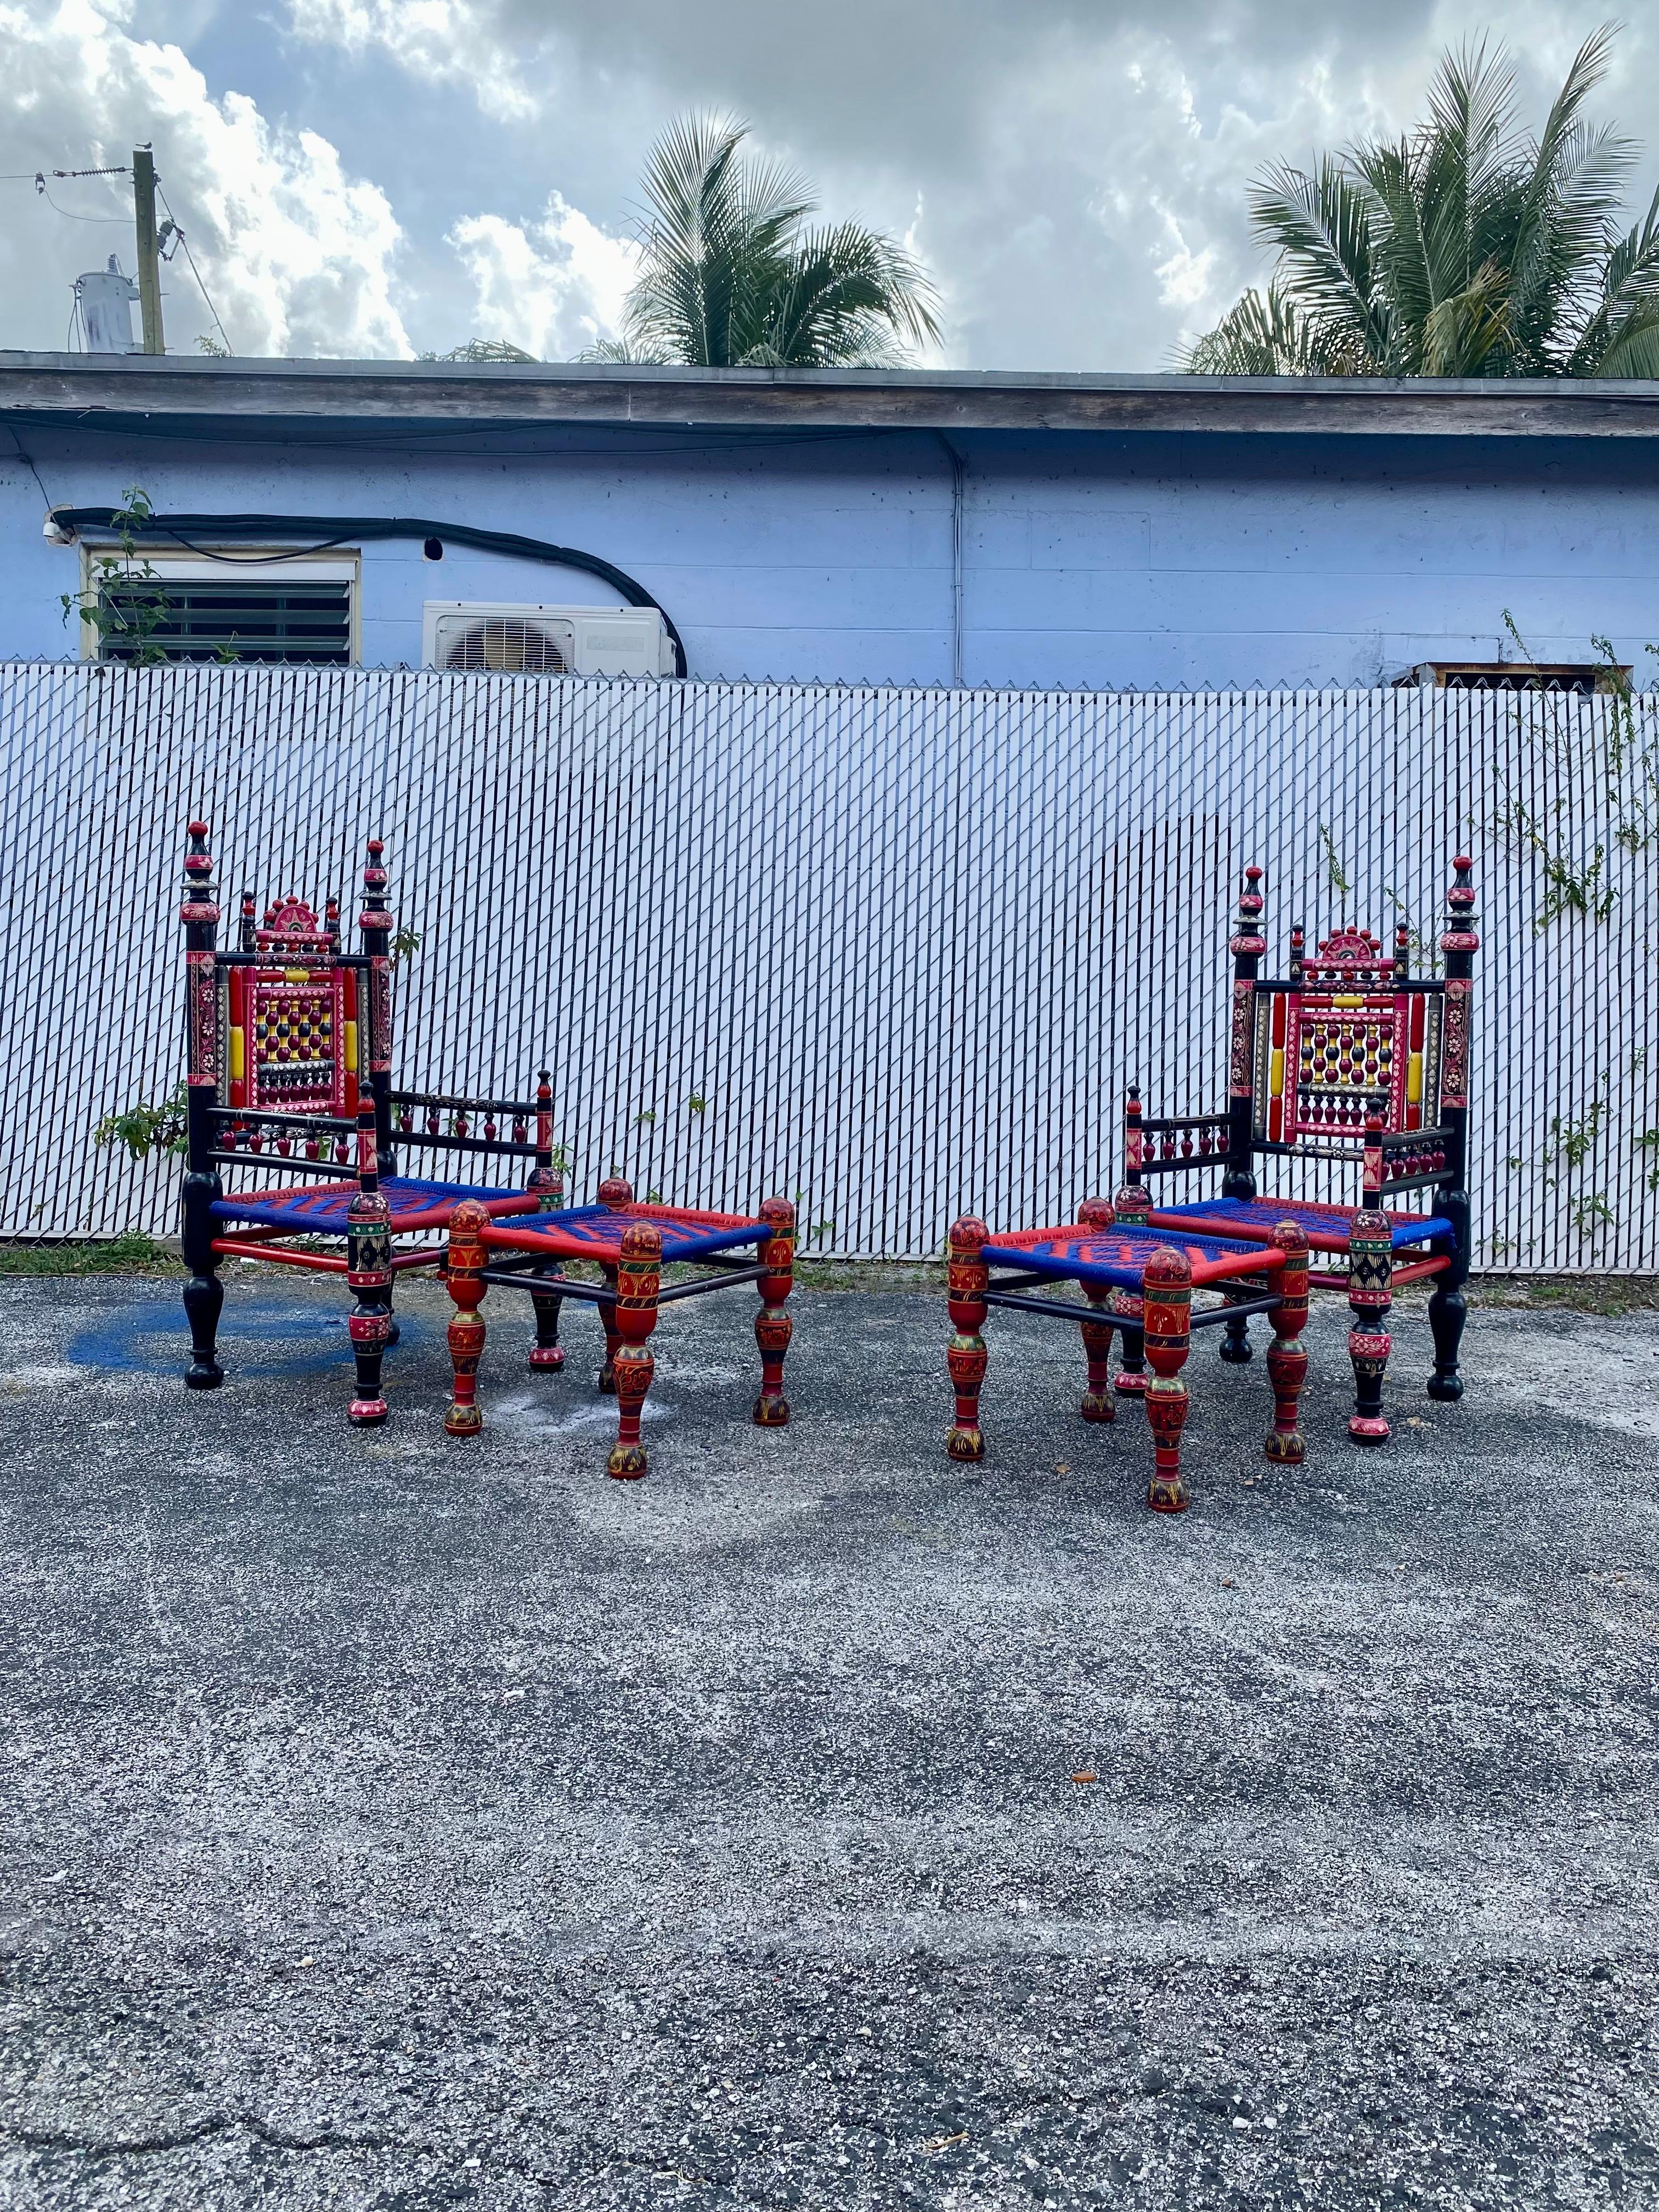 On offer on this occasion is one of the most stunning, hand painted and intricate wood tribal chairs and footstools you could hope to find. This is an ultra-rare opportunity to acquire what is, unequivocally, the best of the best, it being a most